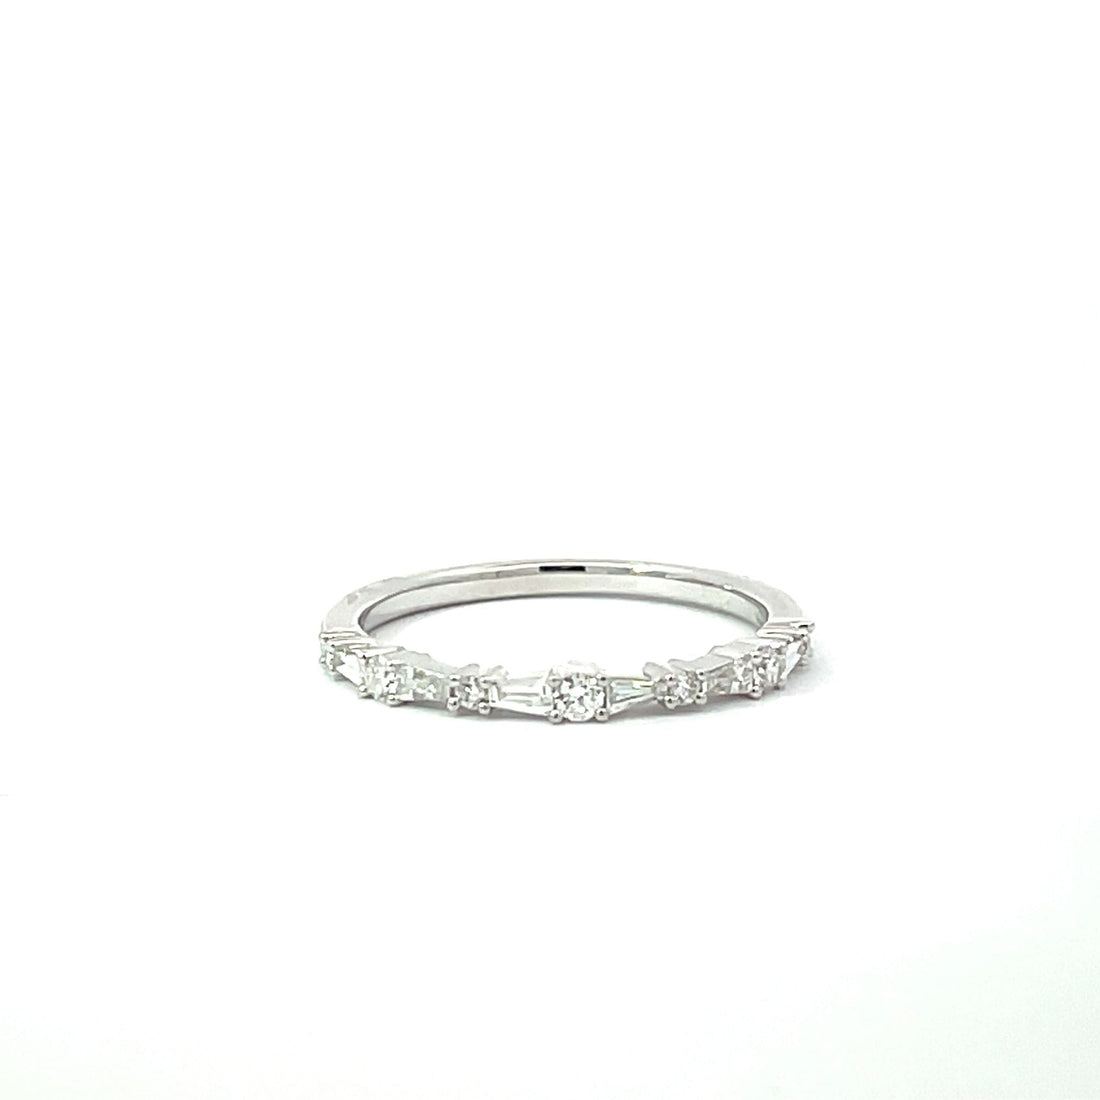 White Gold Baguette and Round Diamond Wedding Band - Skeie's Jewelers